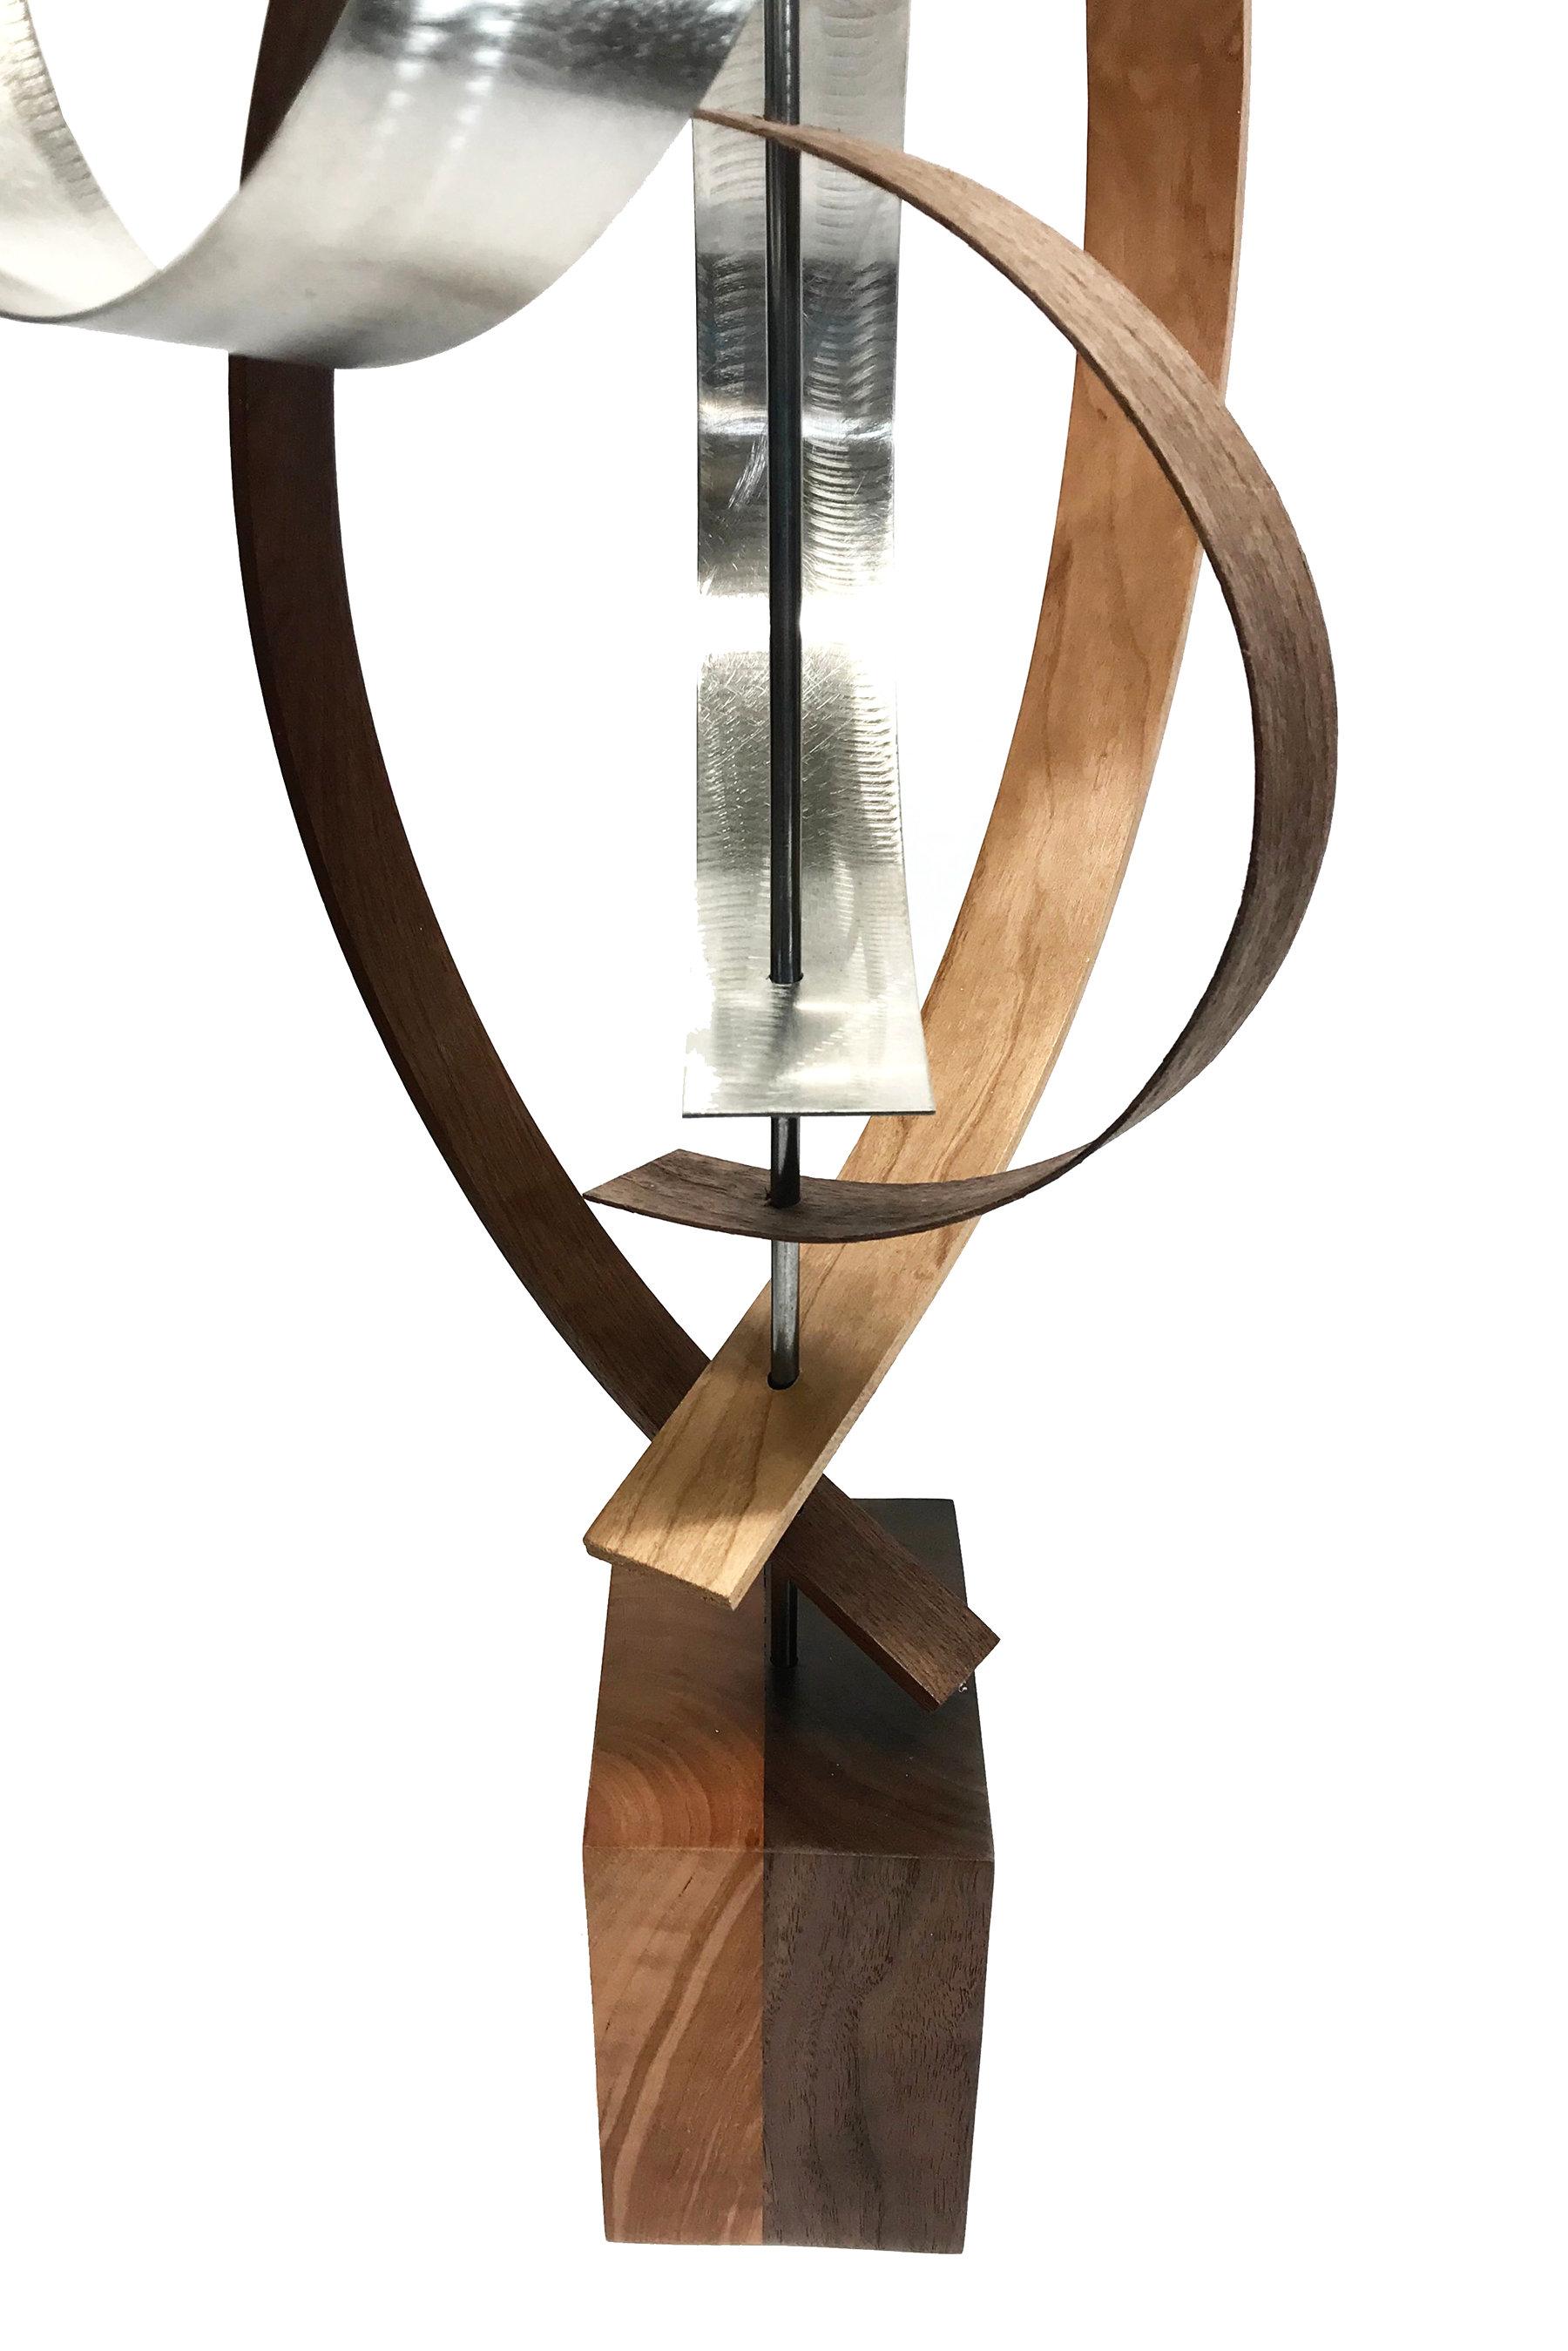 Mid-Century Modern Inspired,  Wood Sculpture, Contemporary Abstract, by Jeff L. 3